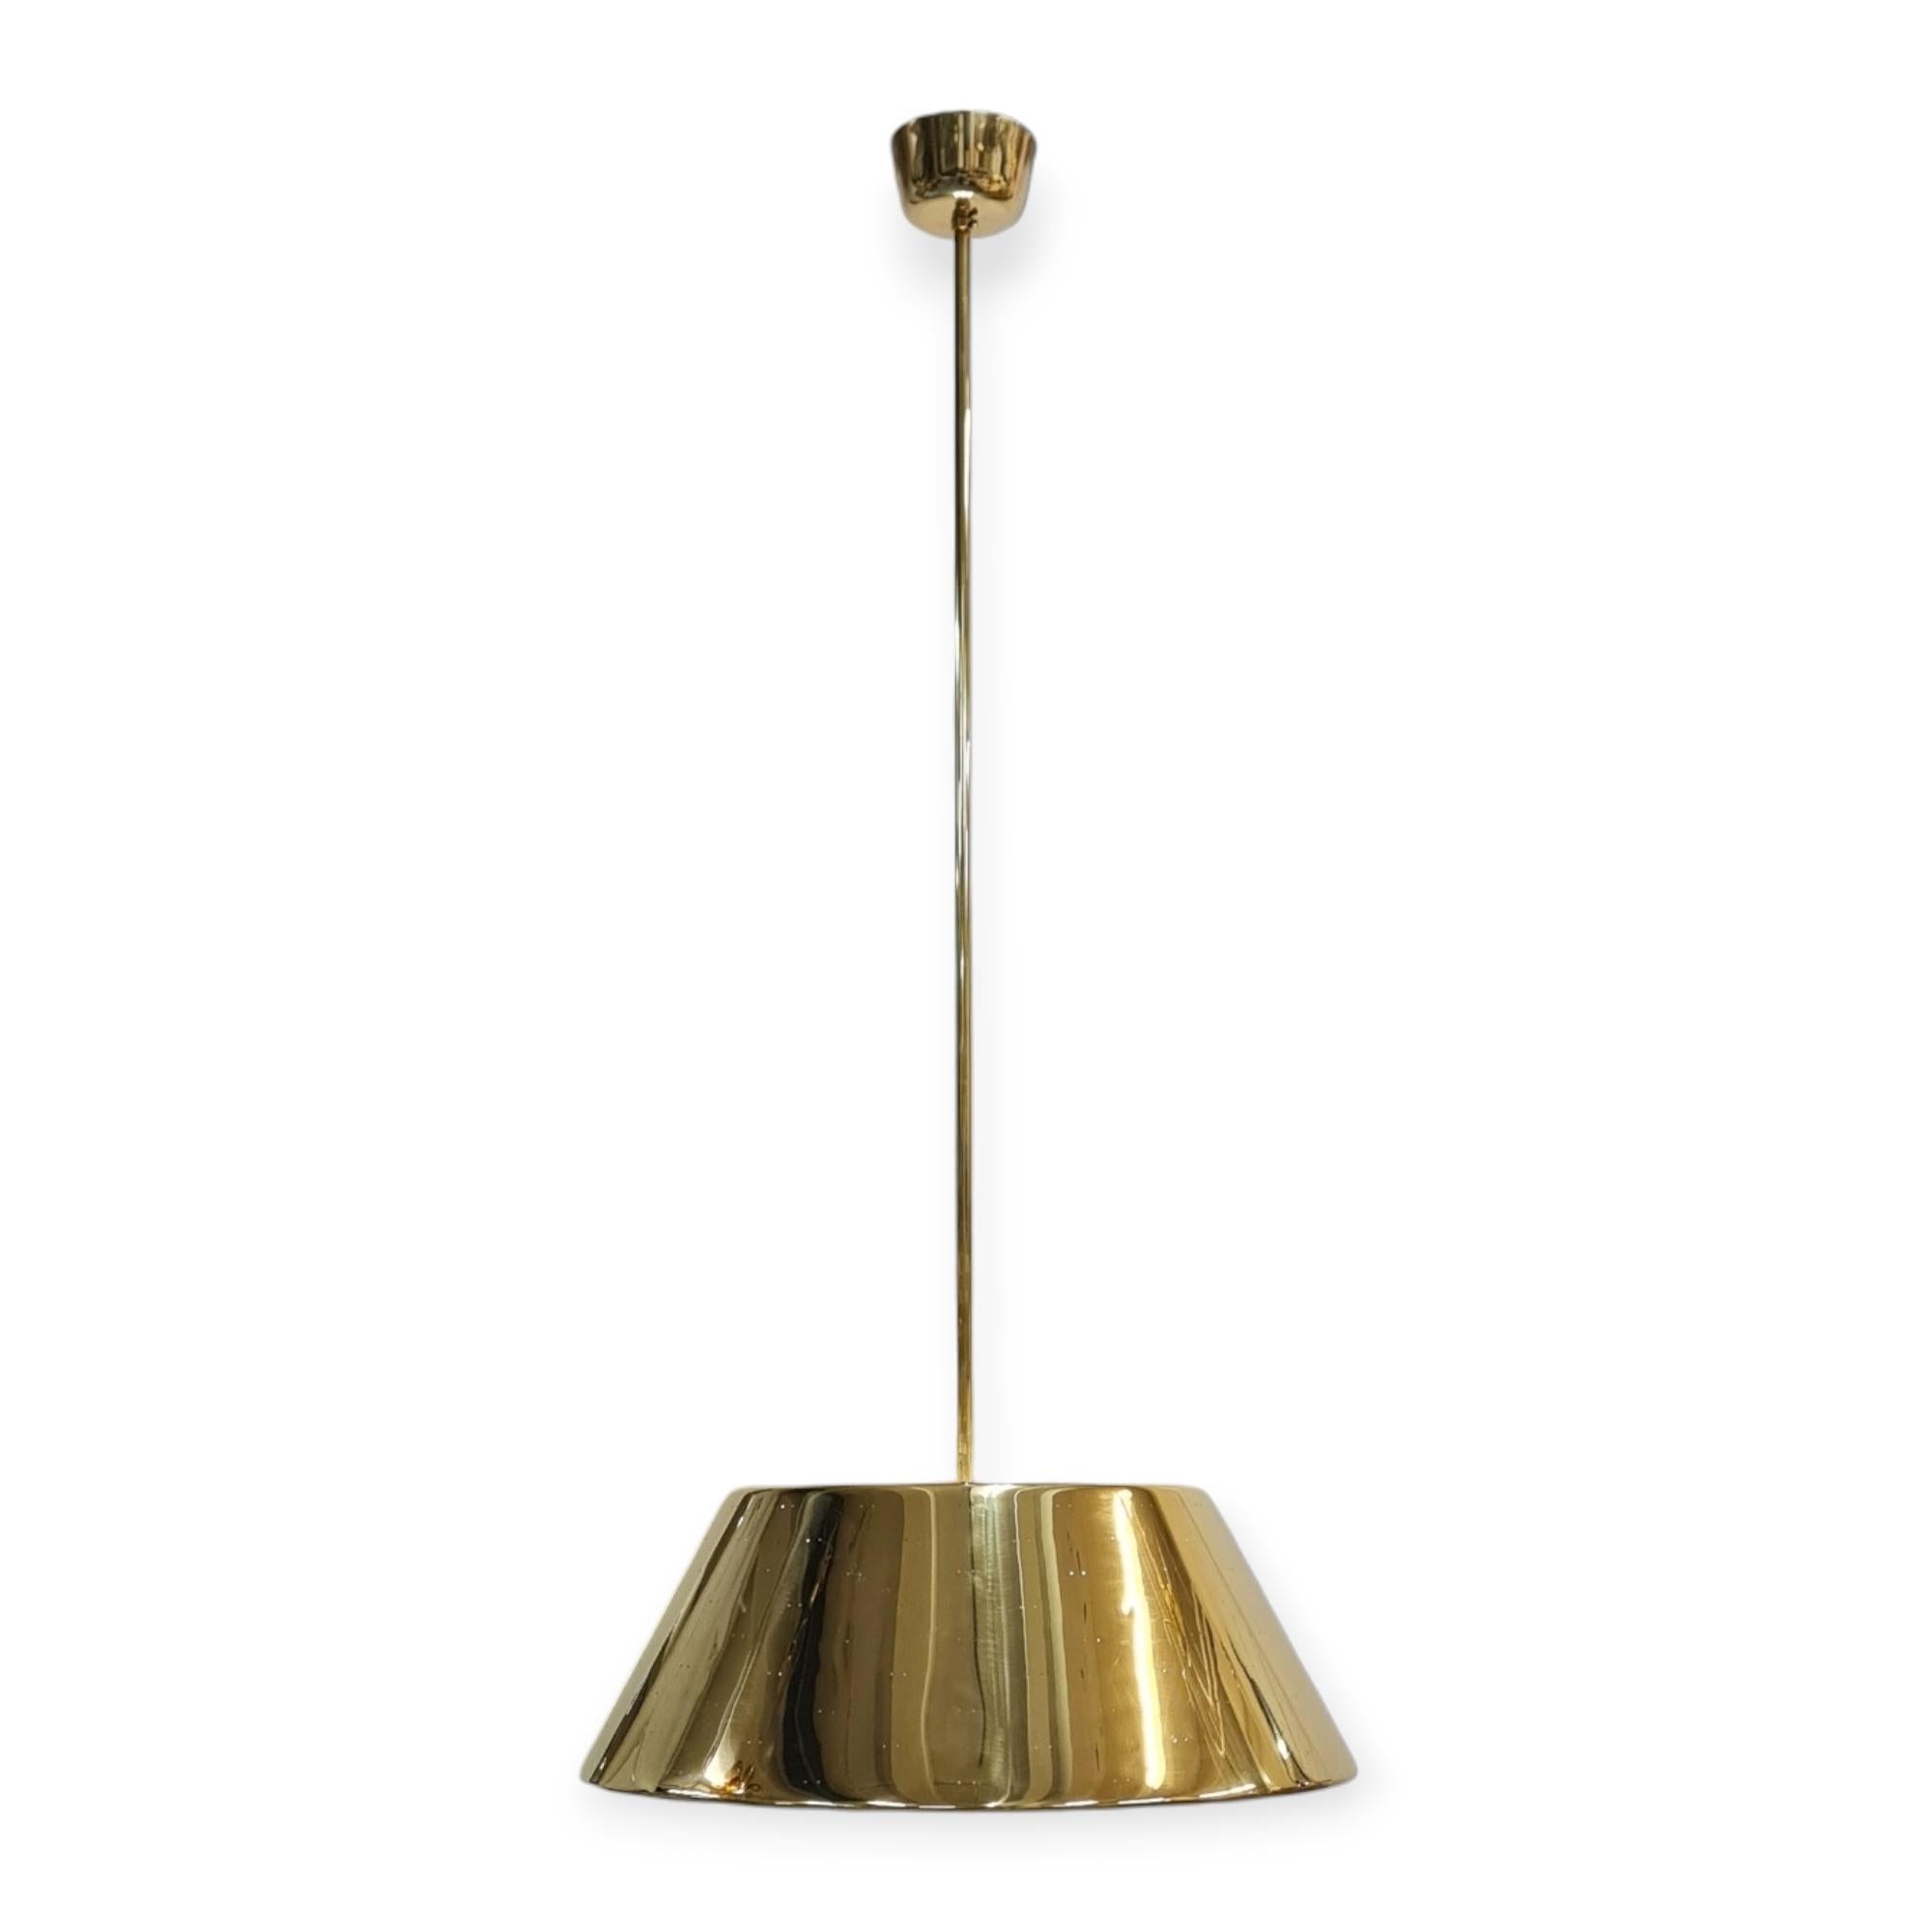 Finnish A Grand Paavo Tynell Brass Ceiling Pendant, Idman 1950s For Sale